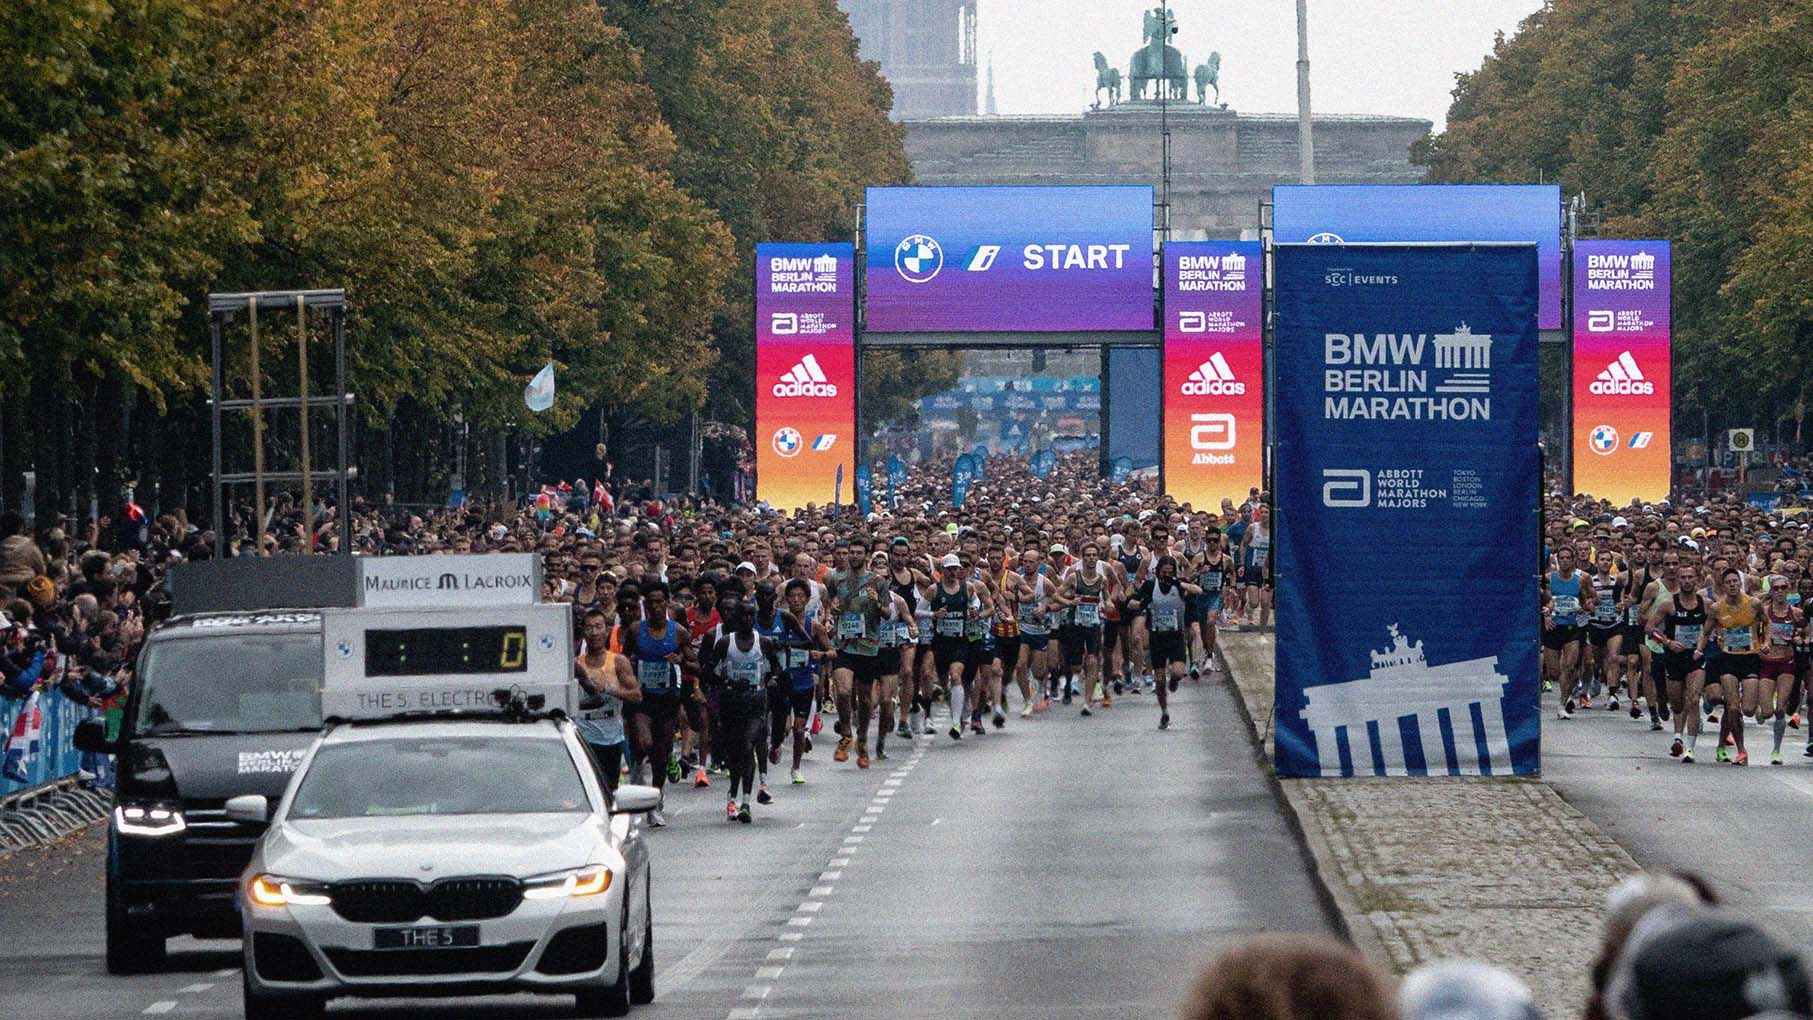 Wide photo showing thousands of runners leading the Berlin Marathon.